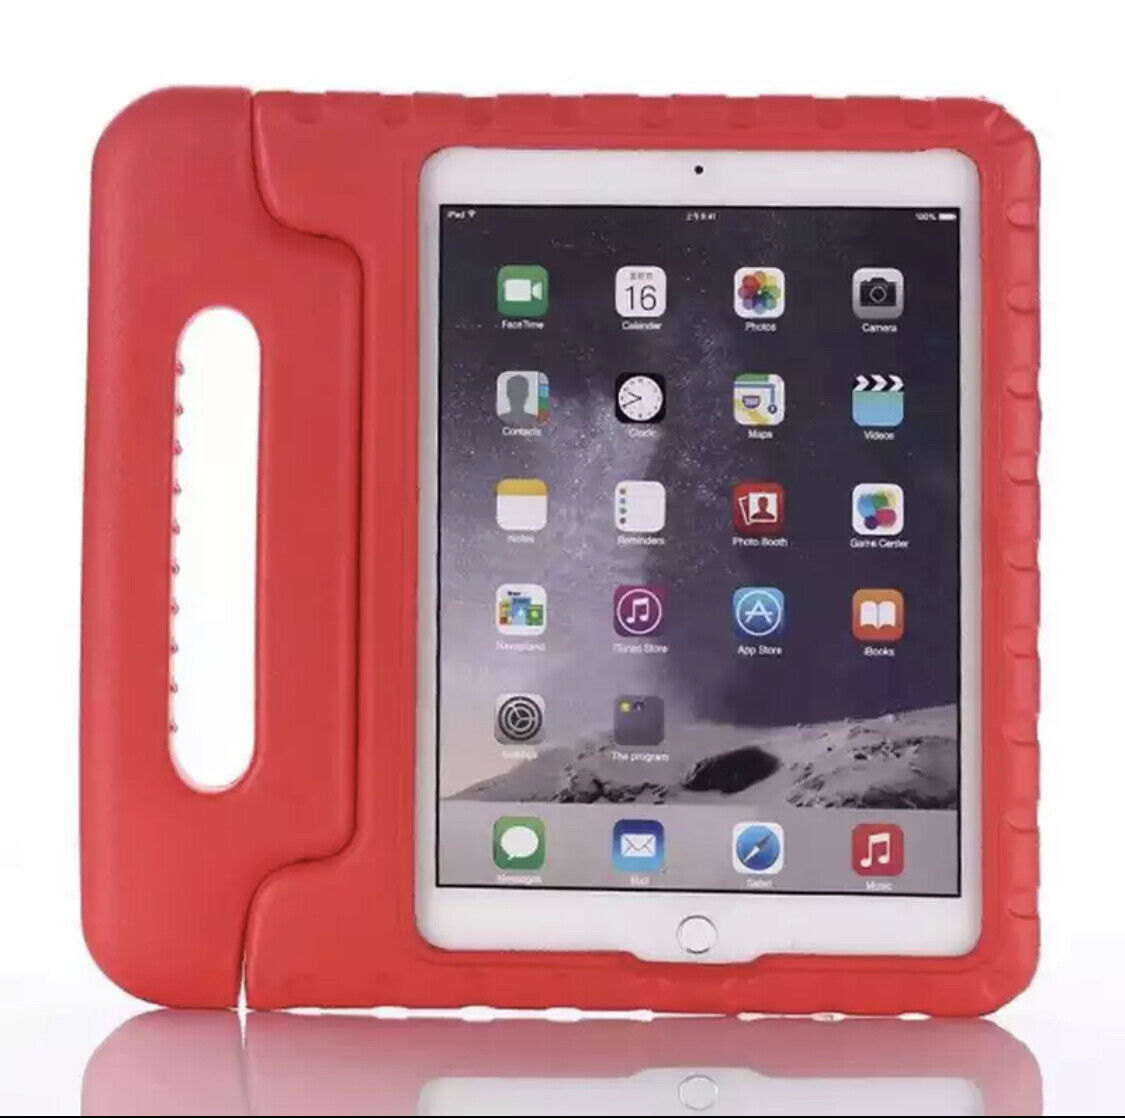 Kids Shockproof Foam Case Handle Cover Stand for iPad 2 3 4 5 Mini Air Pro 10.5